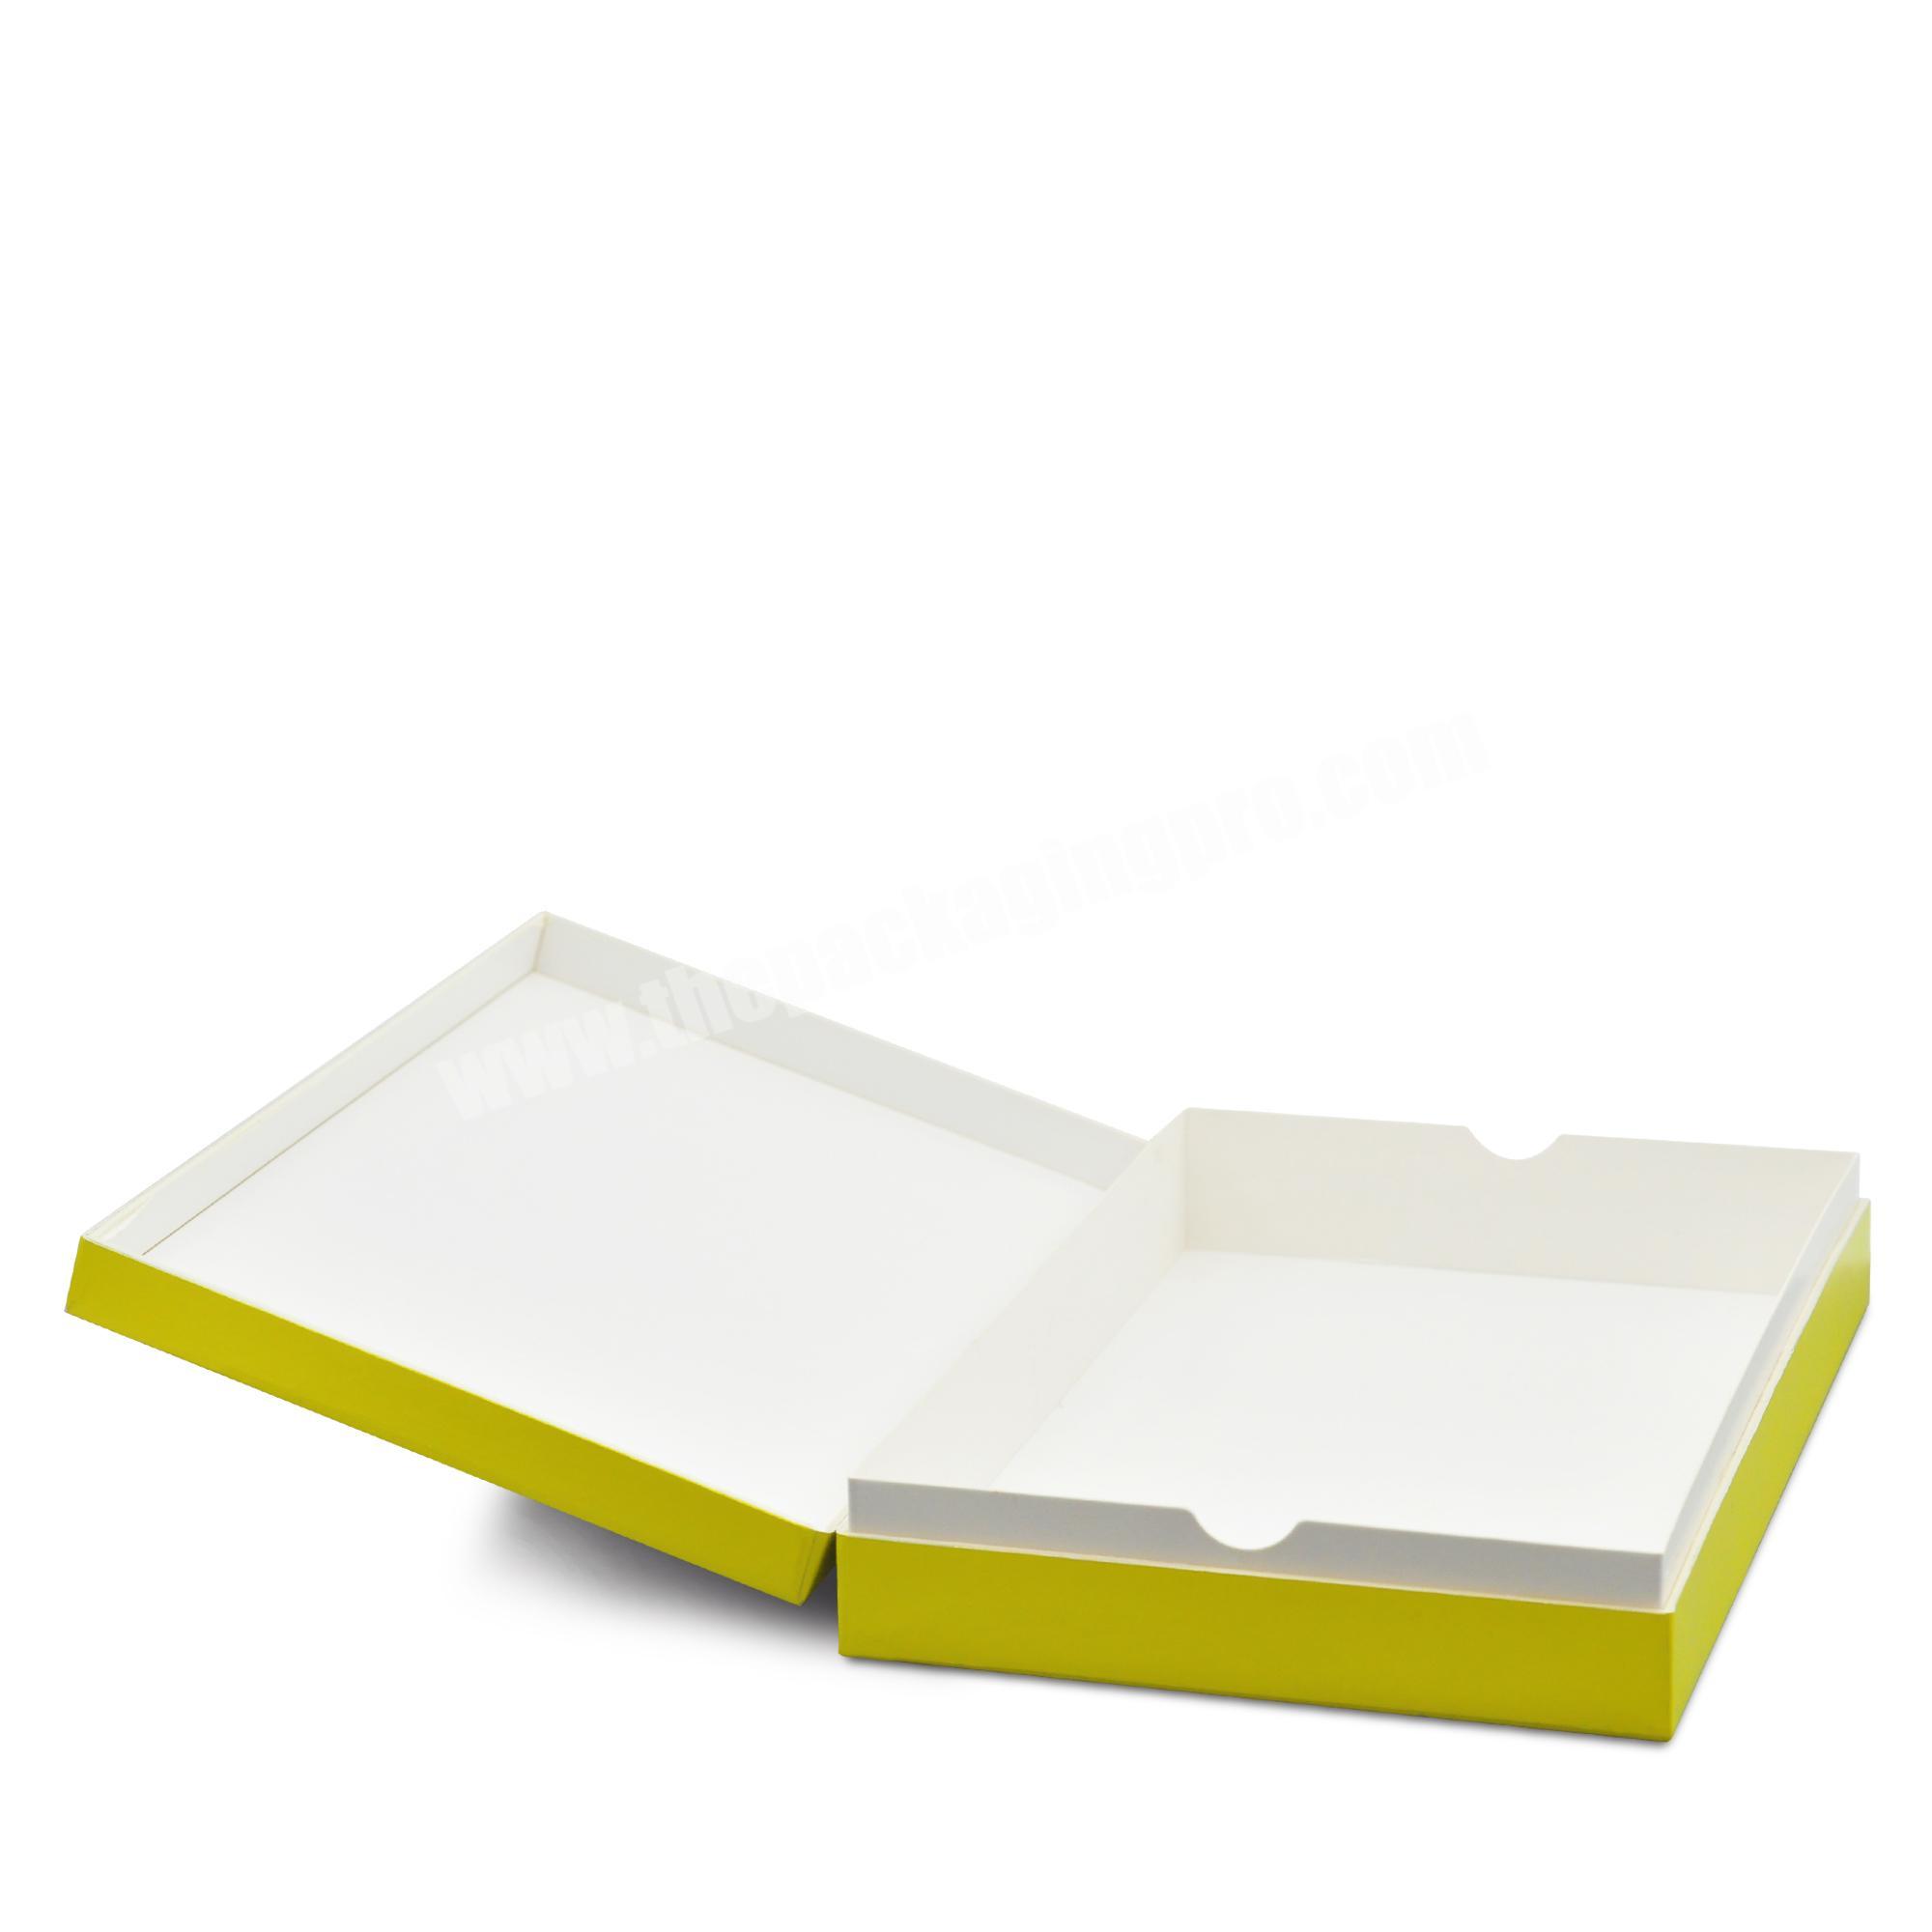 Recyclable Yellow Cartons Medium Gift Boxes With Lids high quality printing artpaper cosmetic box